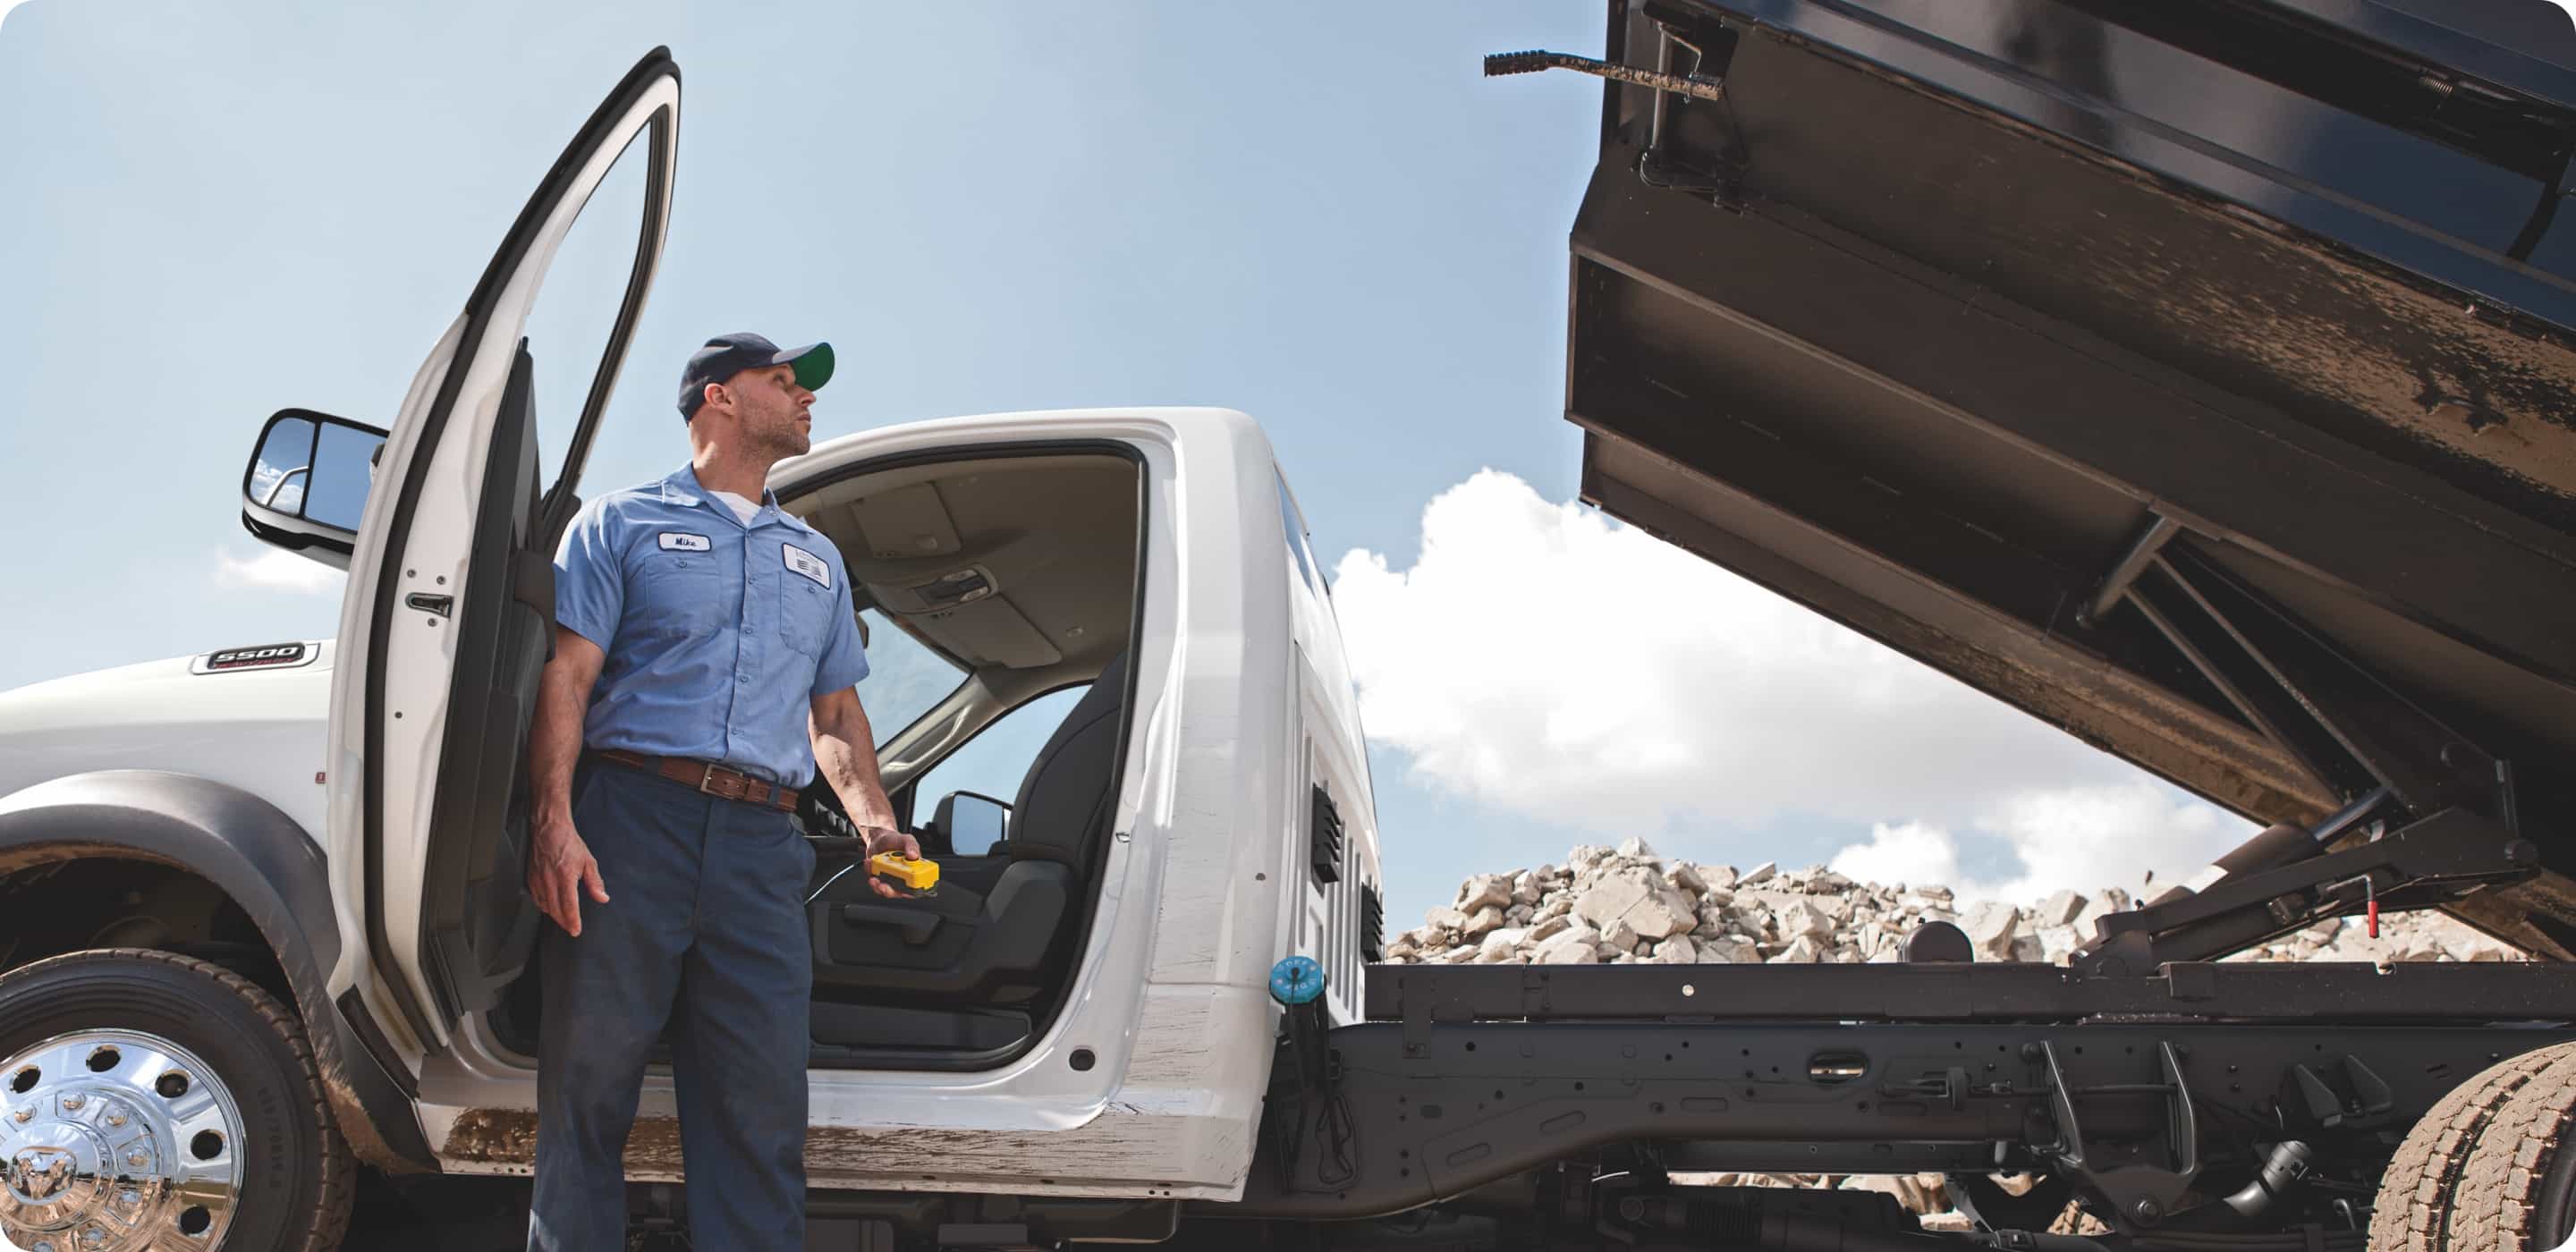 Display A man standing beside a 2021 Ram Chassis Cab, looking at the raised dump truck upfit on the truck.